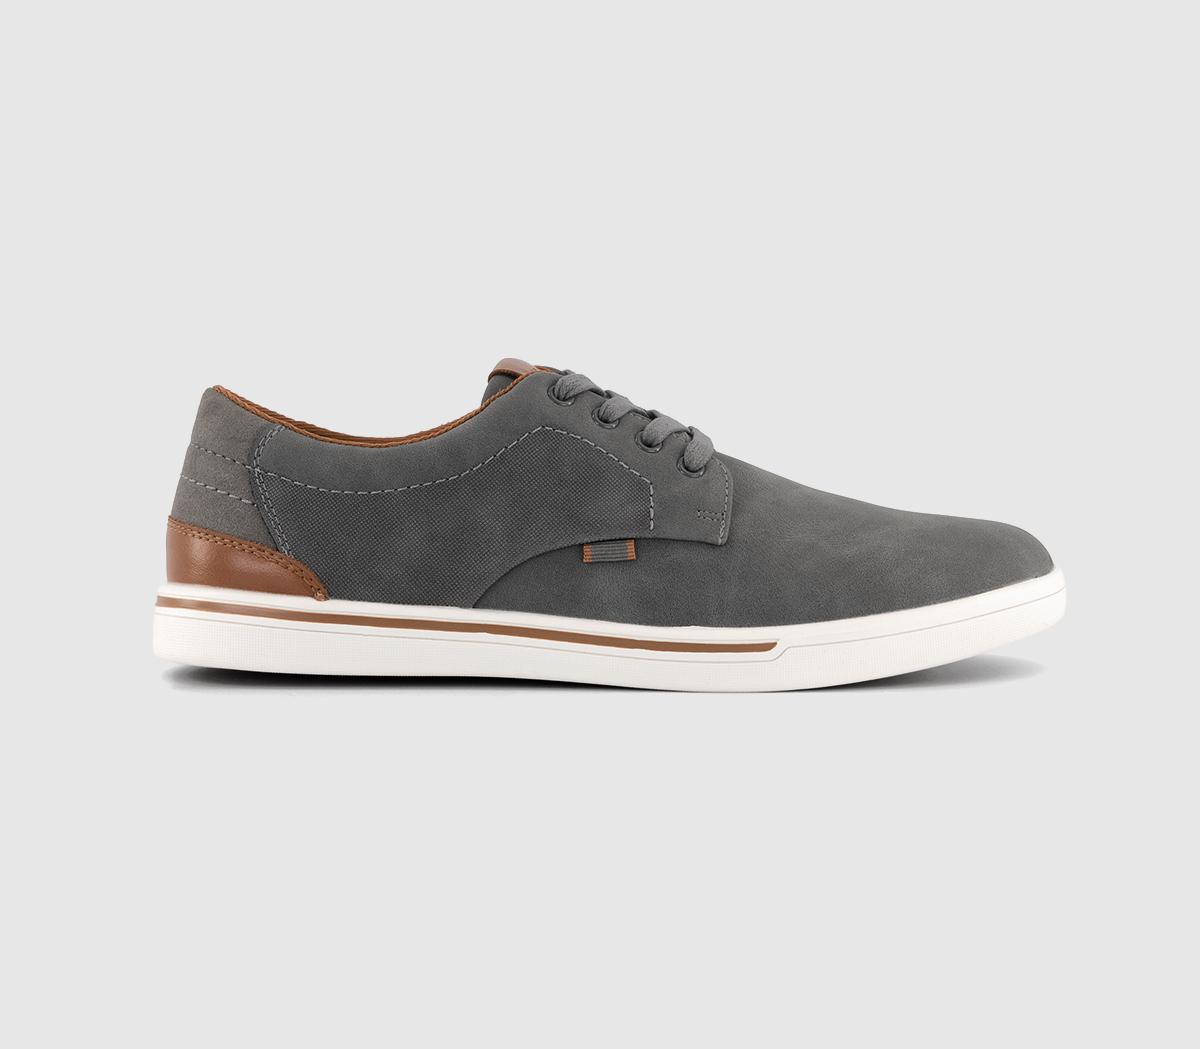 OFFICECasey Perforated Lace Up ShoesGrey